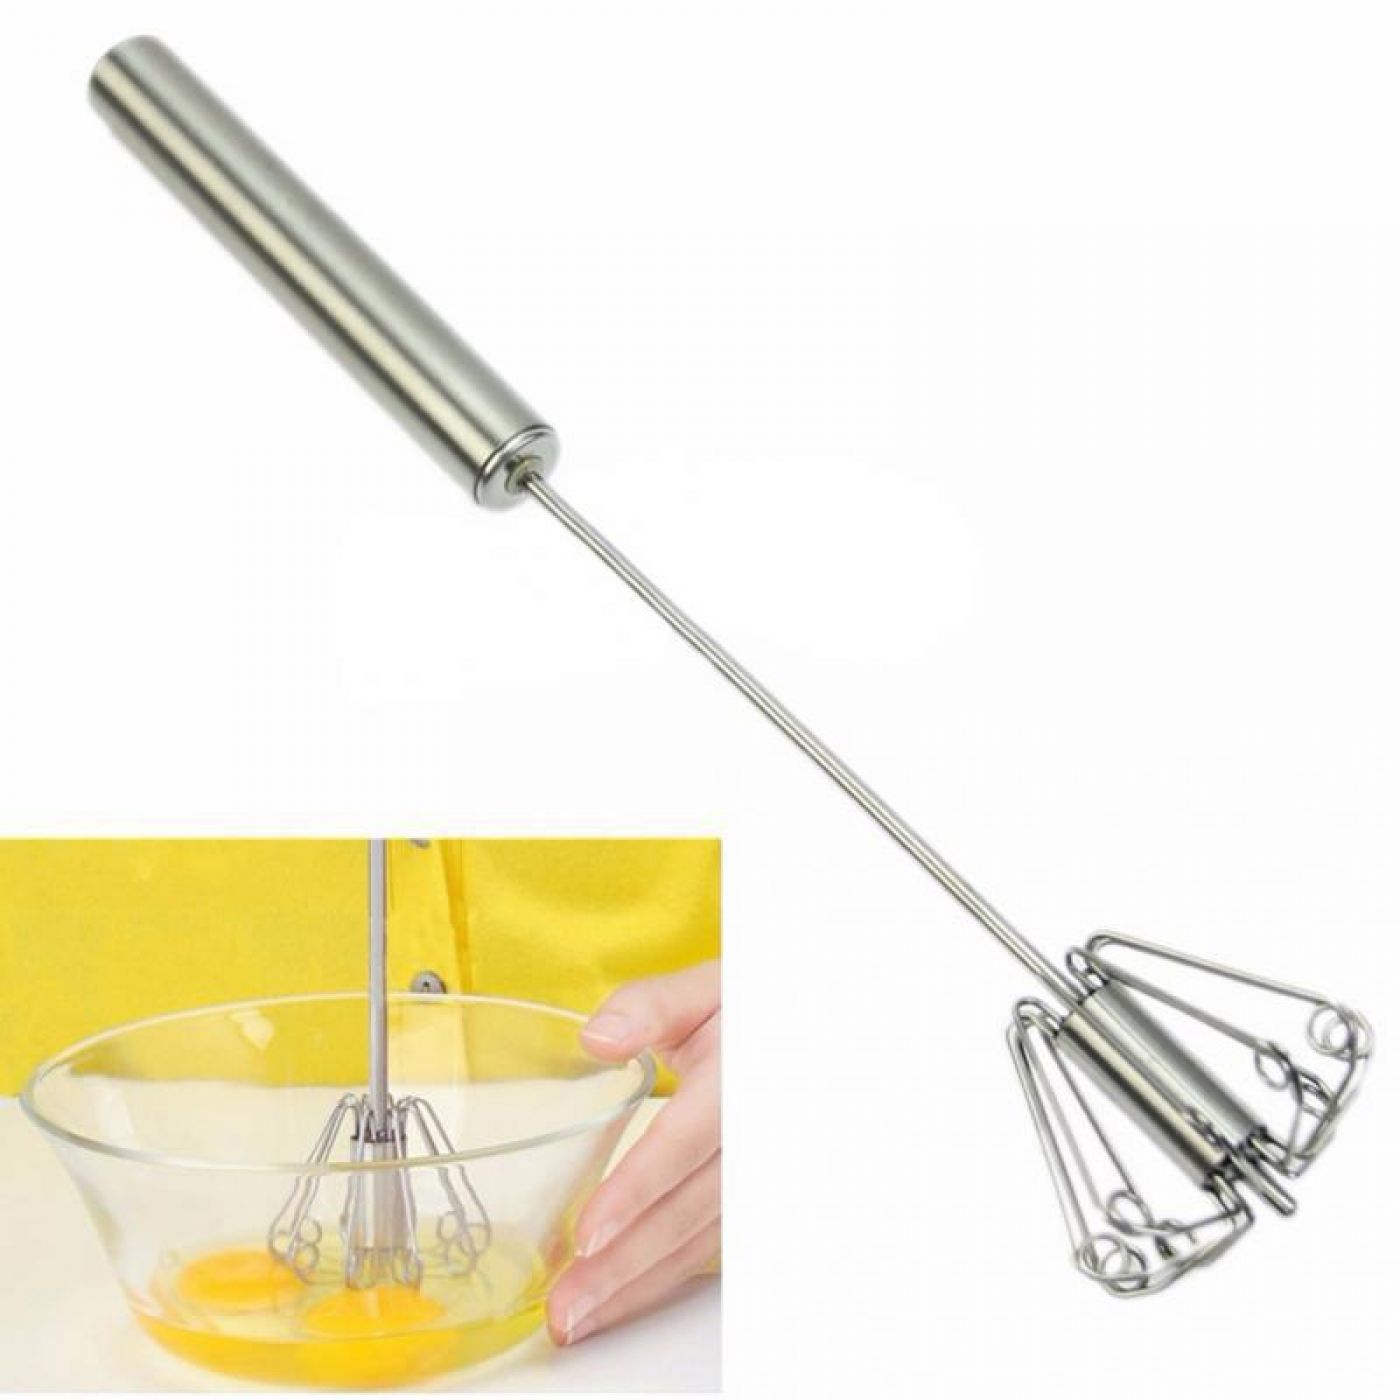 https://www.molooco.com/wp-content/uploads/2021/08/2019-new-Stainless-Steel-Egg-Beaters-Semi-automatic-rotary-Kitchen-Gadgets-Egg-Stirring-Whisk-Rotary-kitchen.jpg